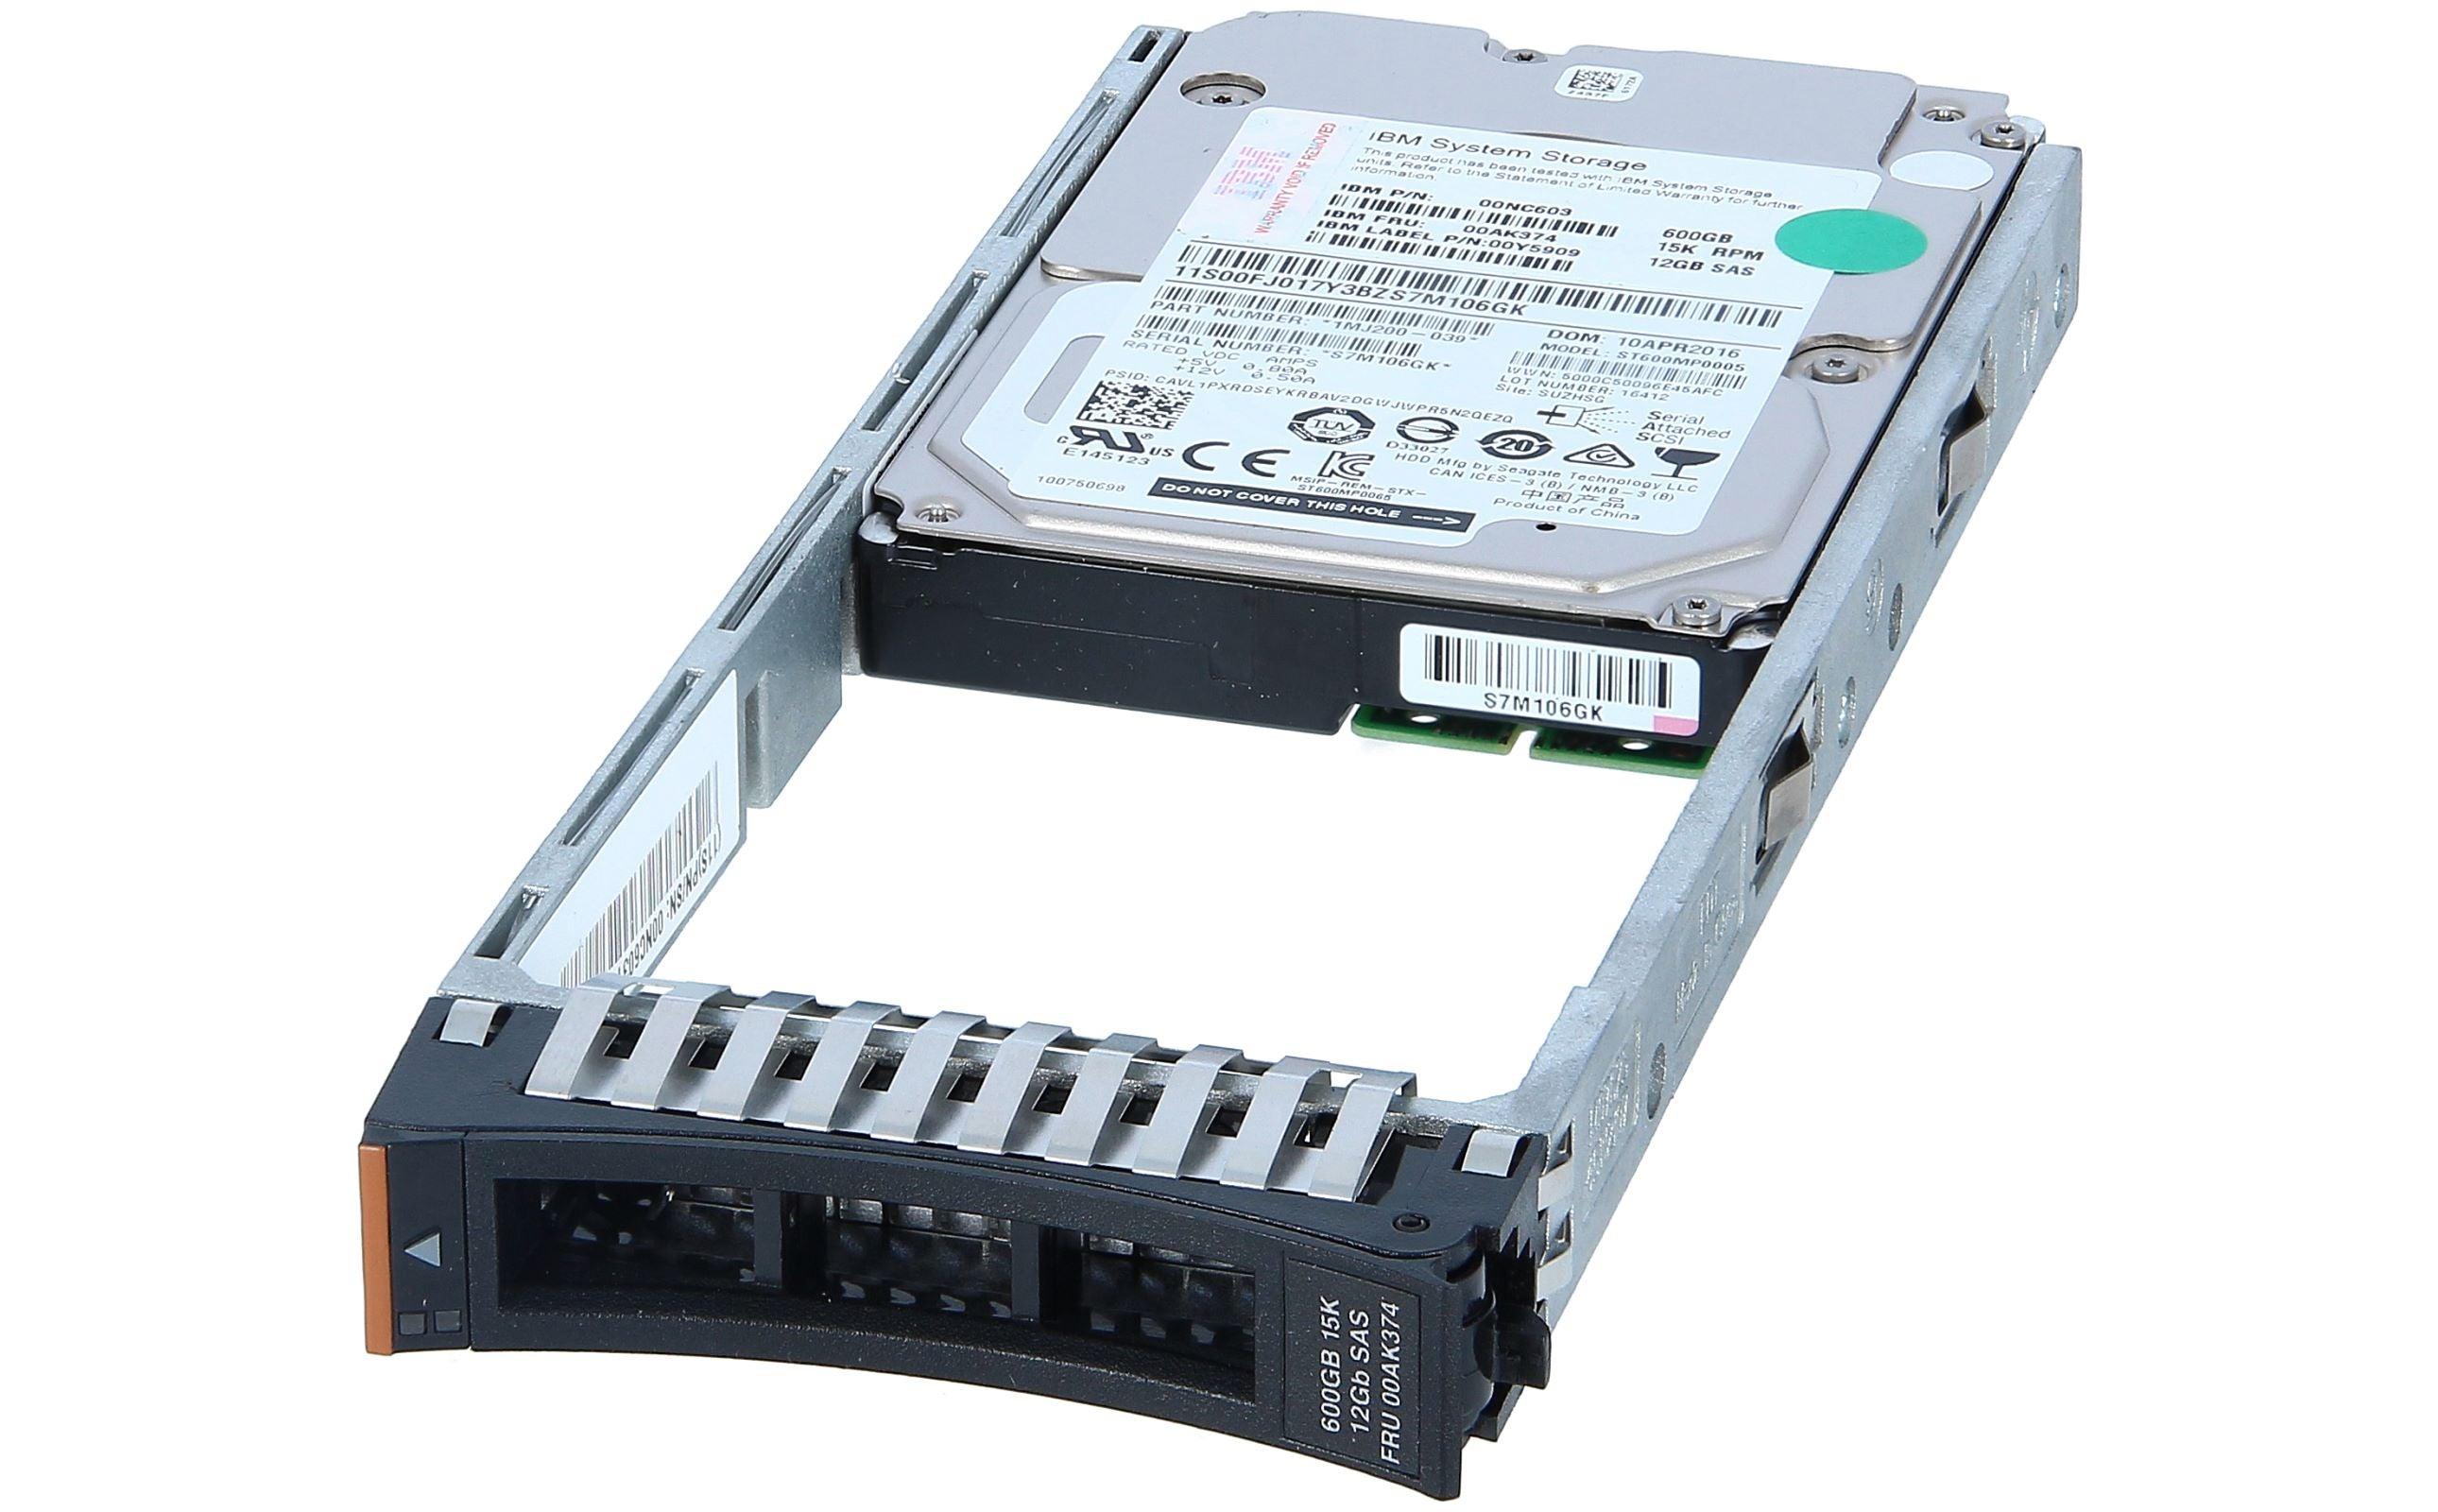 Collection of 600GB Capacity Hard Drives | $135.00